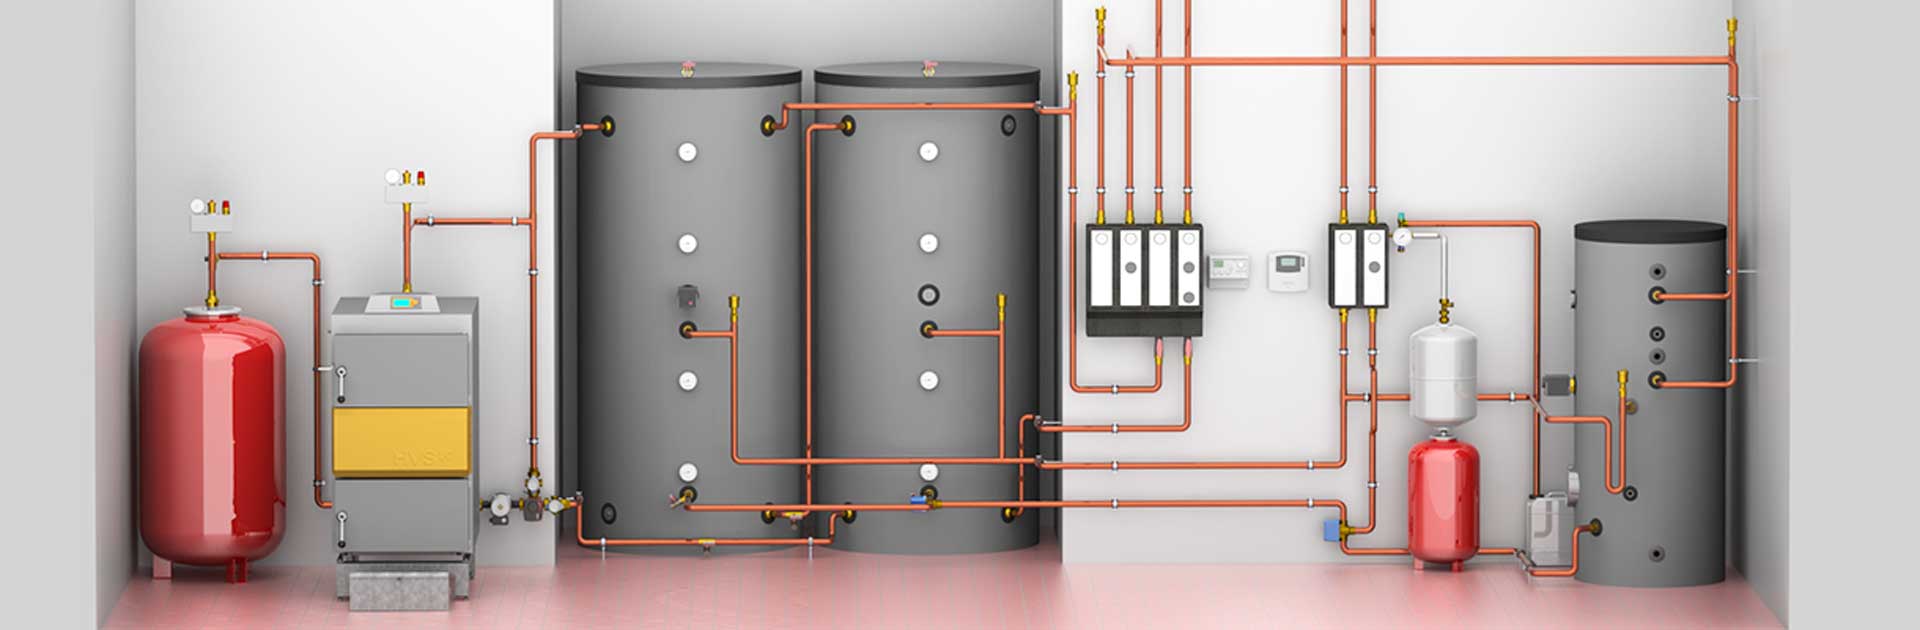 Heating system example